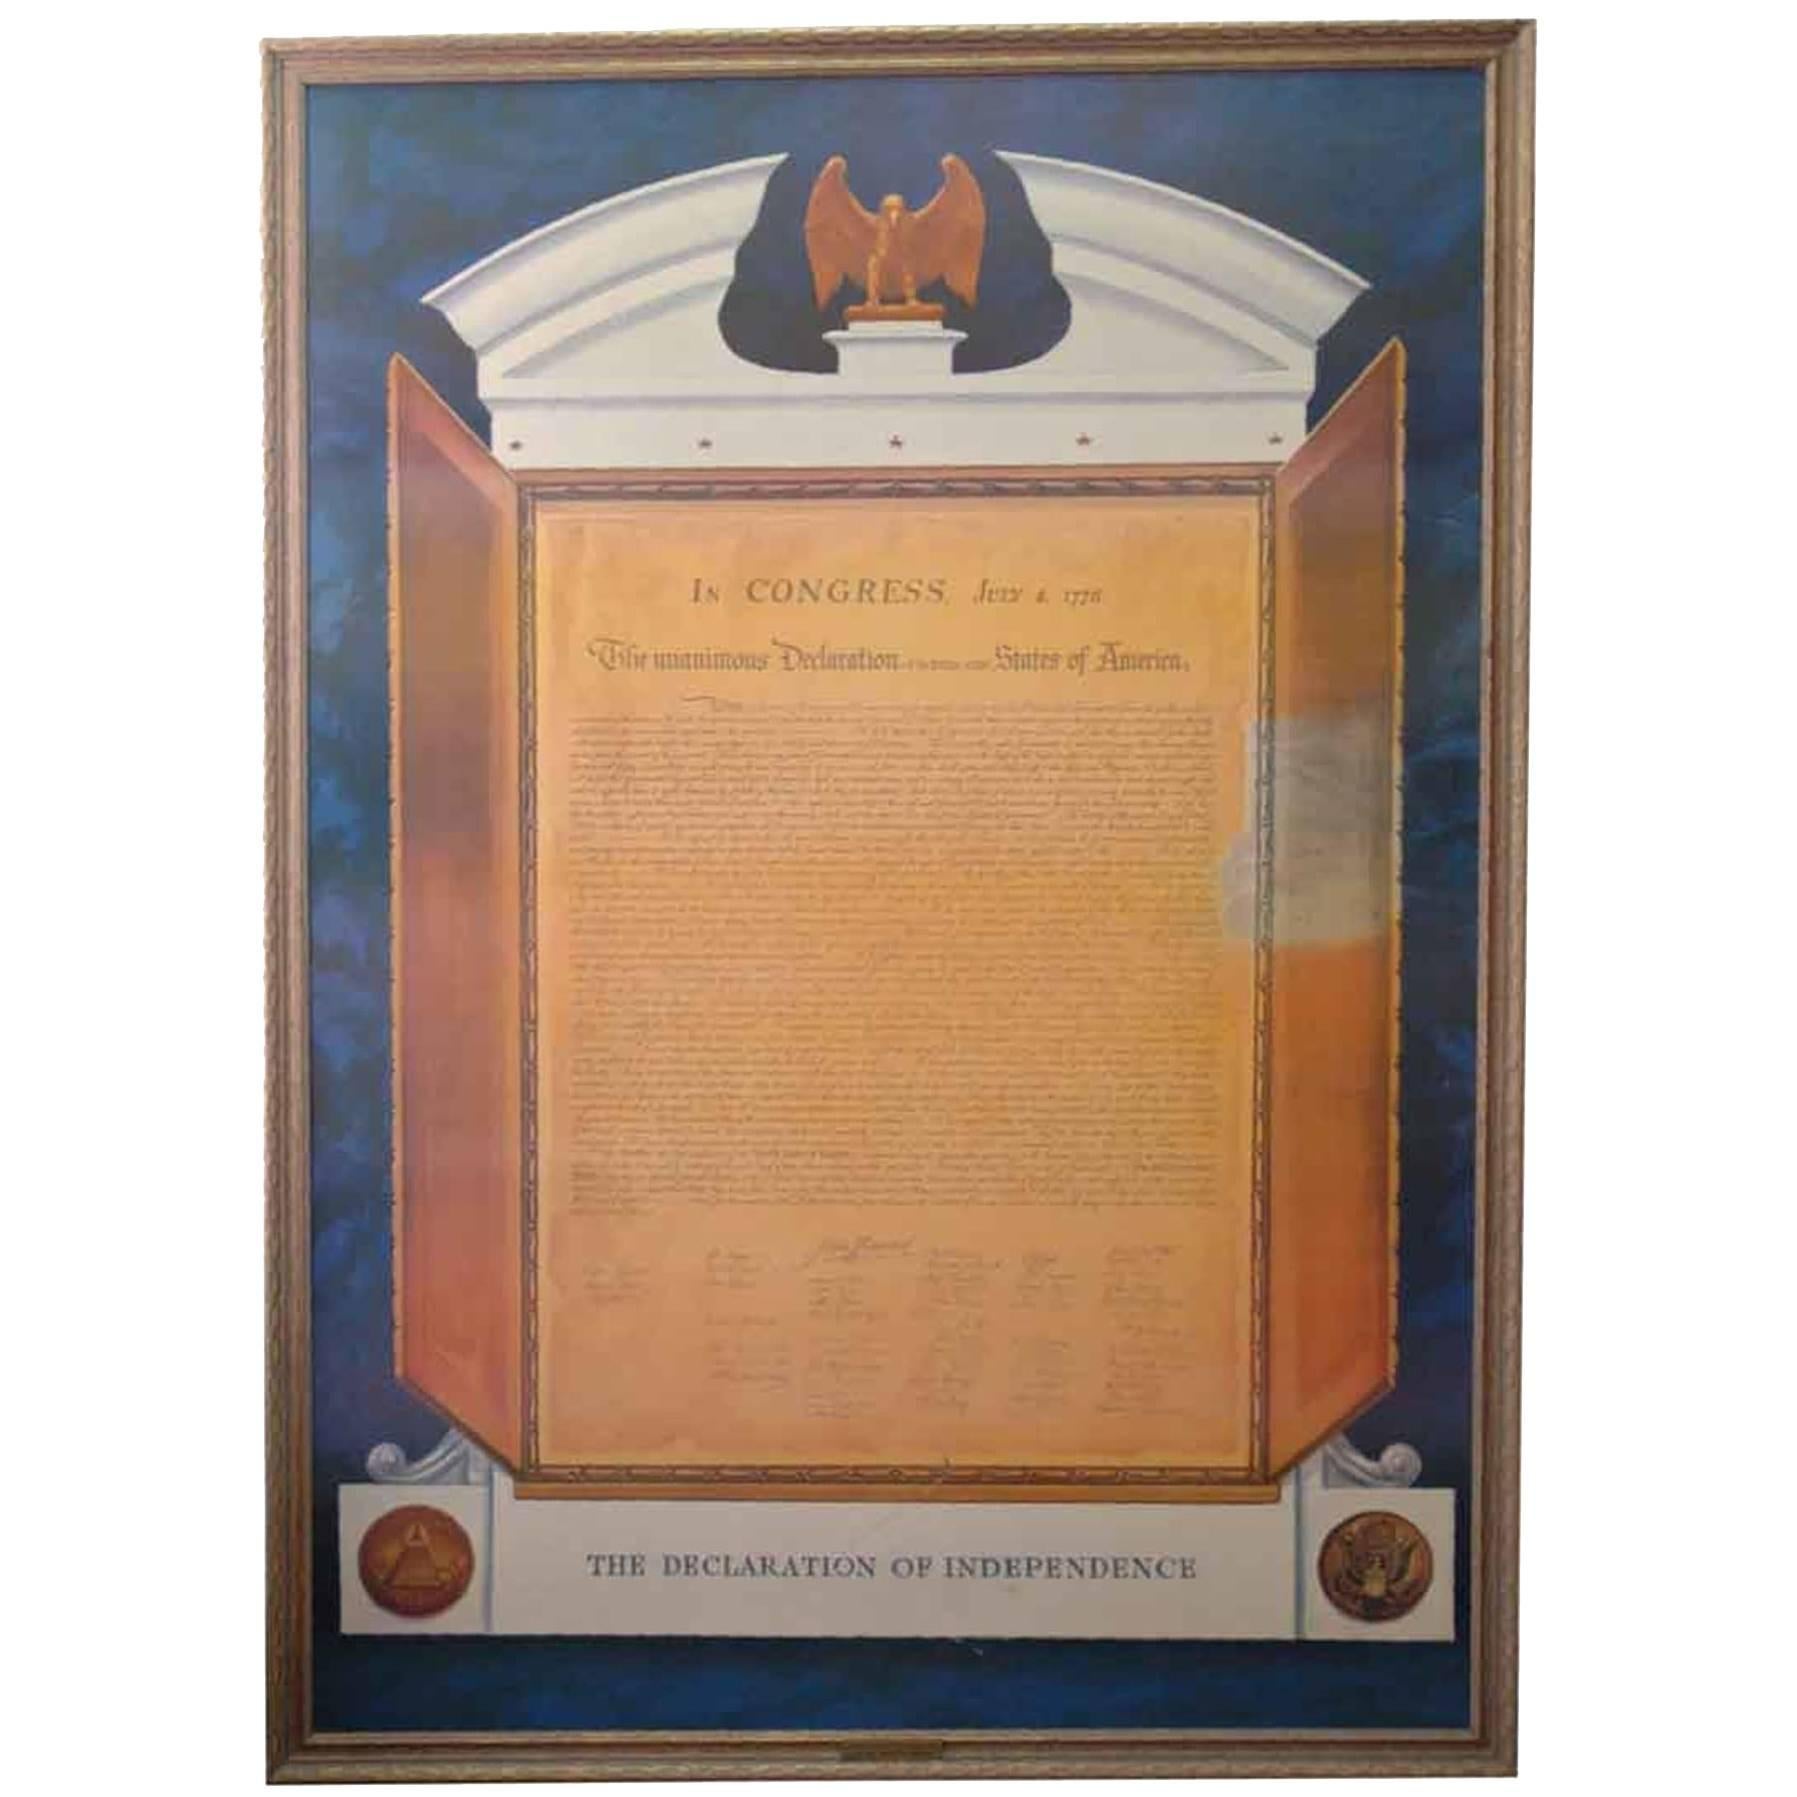 1961 Commemorative Declaration of Independence Lithograph